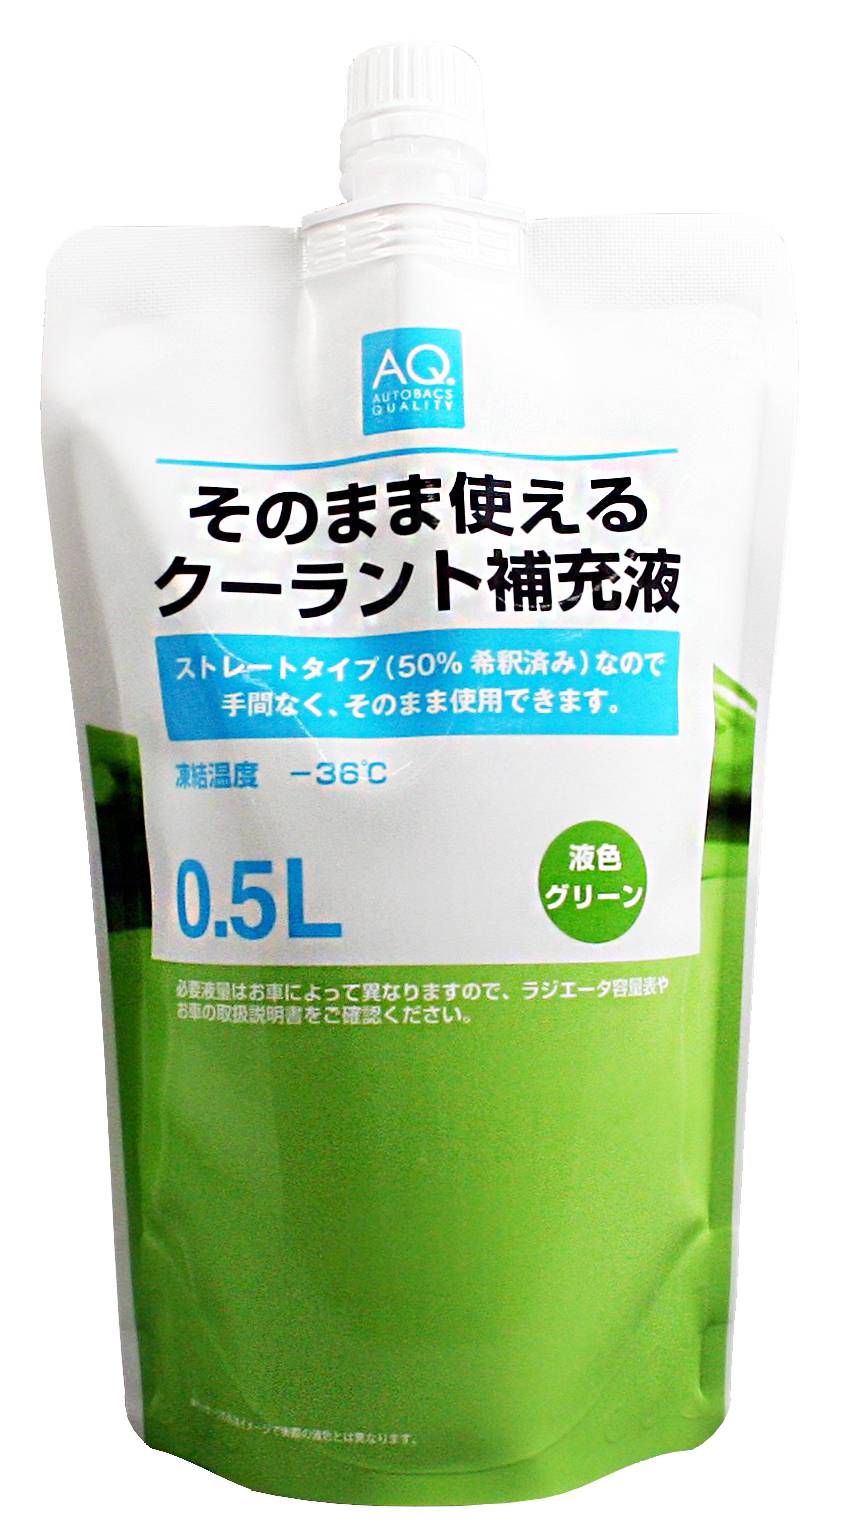 4971475241389-AQ.-Ready-to-use-coolant-replenisher-0.5L-green.jpg